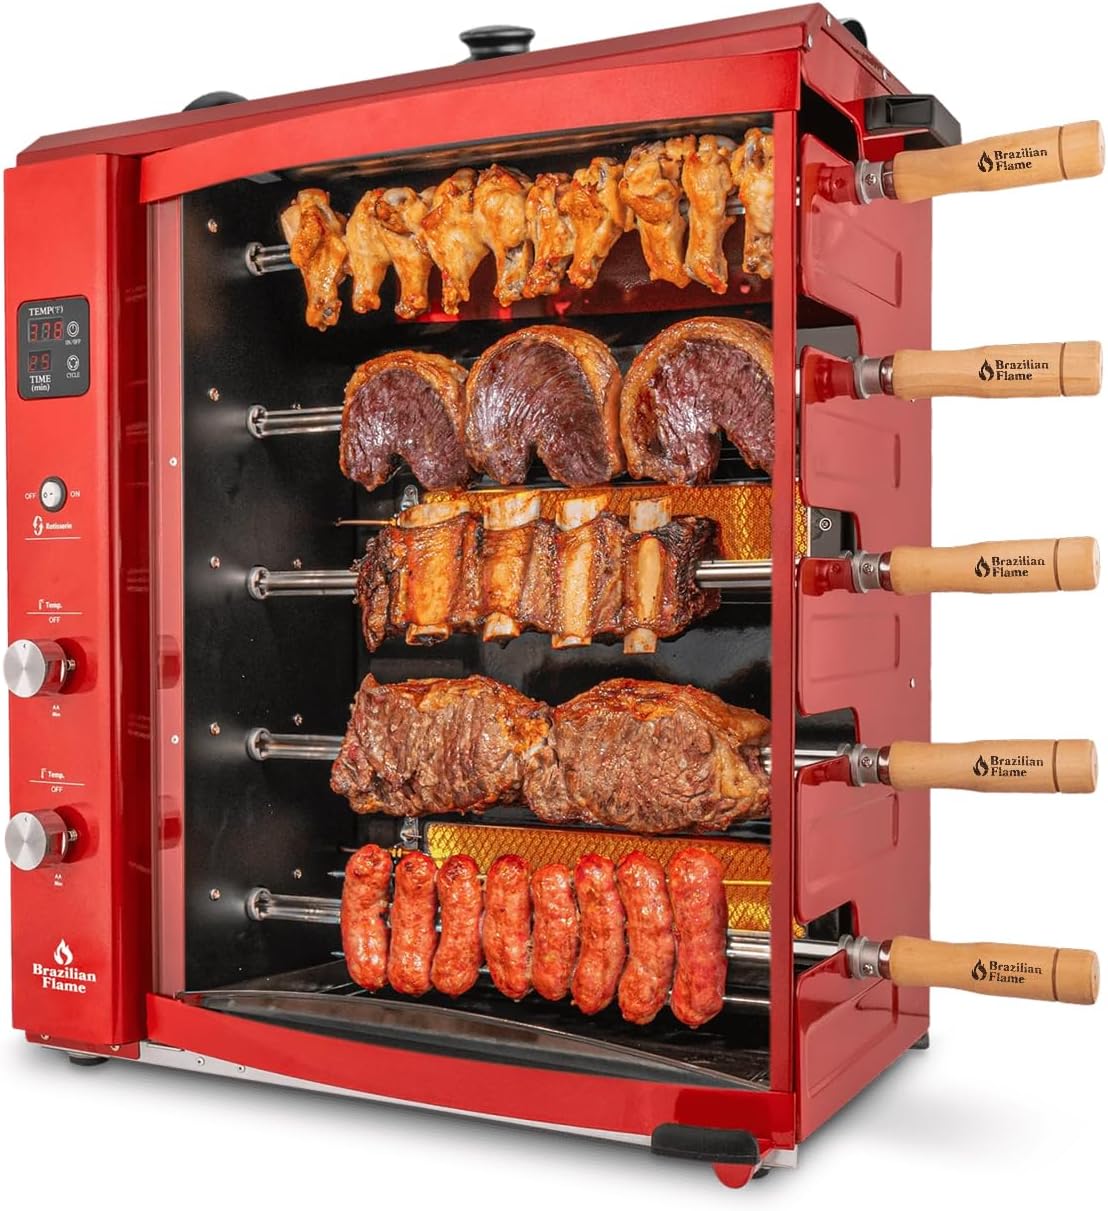 Ultimate Grill Product Reviews & Comparisons